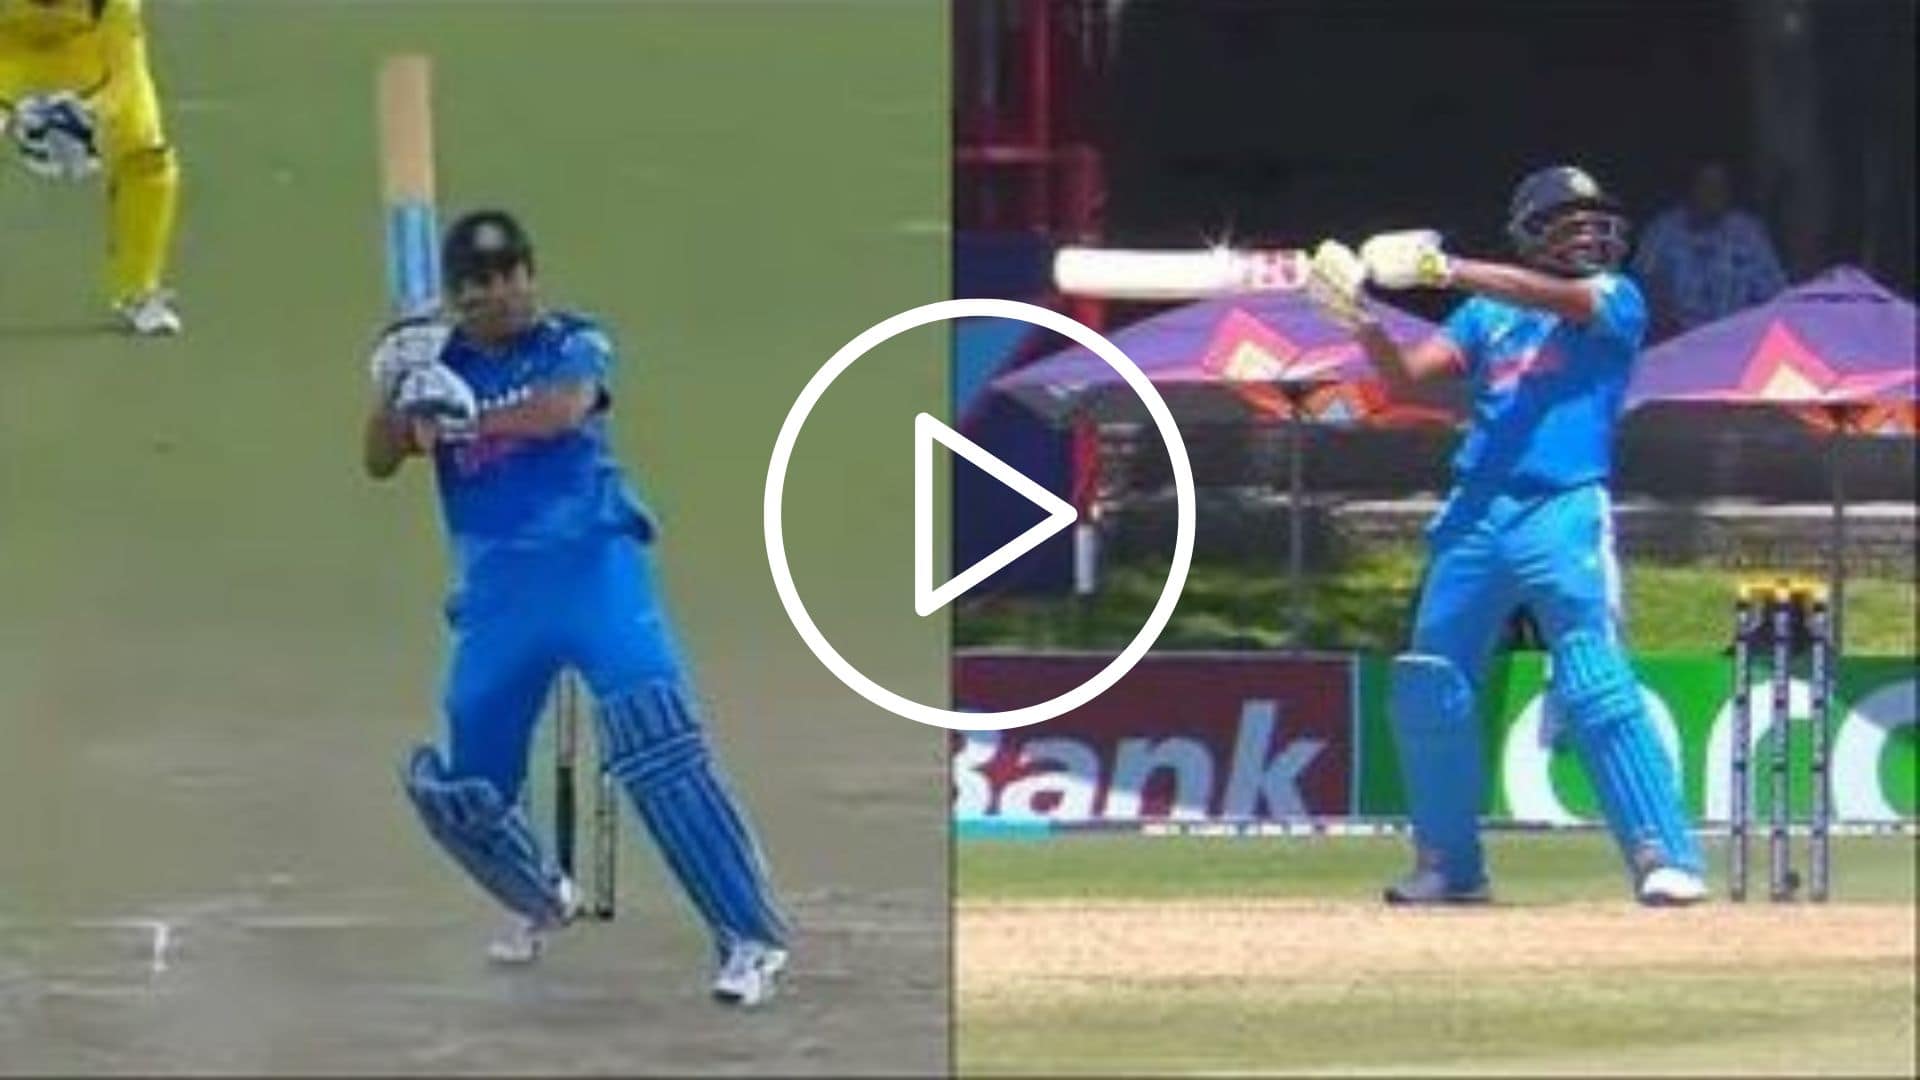 [Watch] Musheer Khan Hits Iconic MS Dhoni 'Helicopter Shot' During U19 World Cup Century